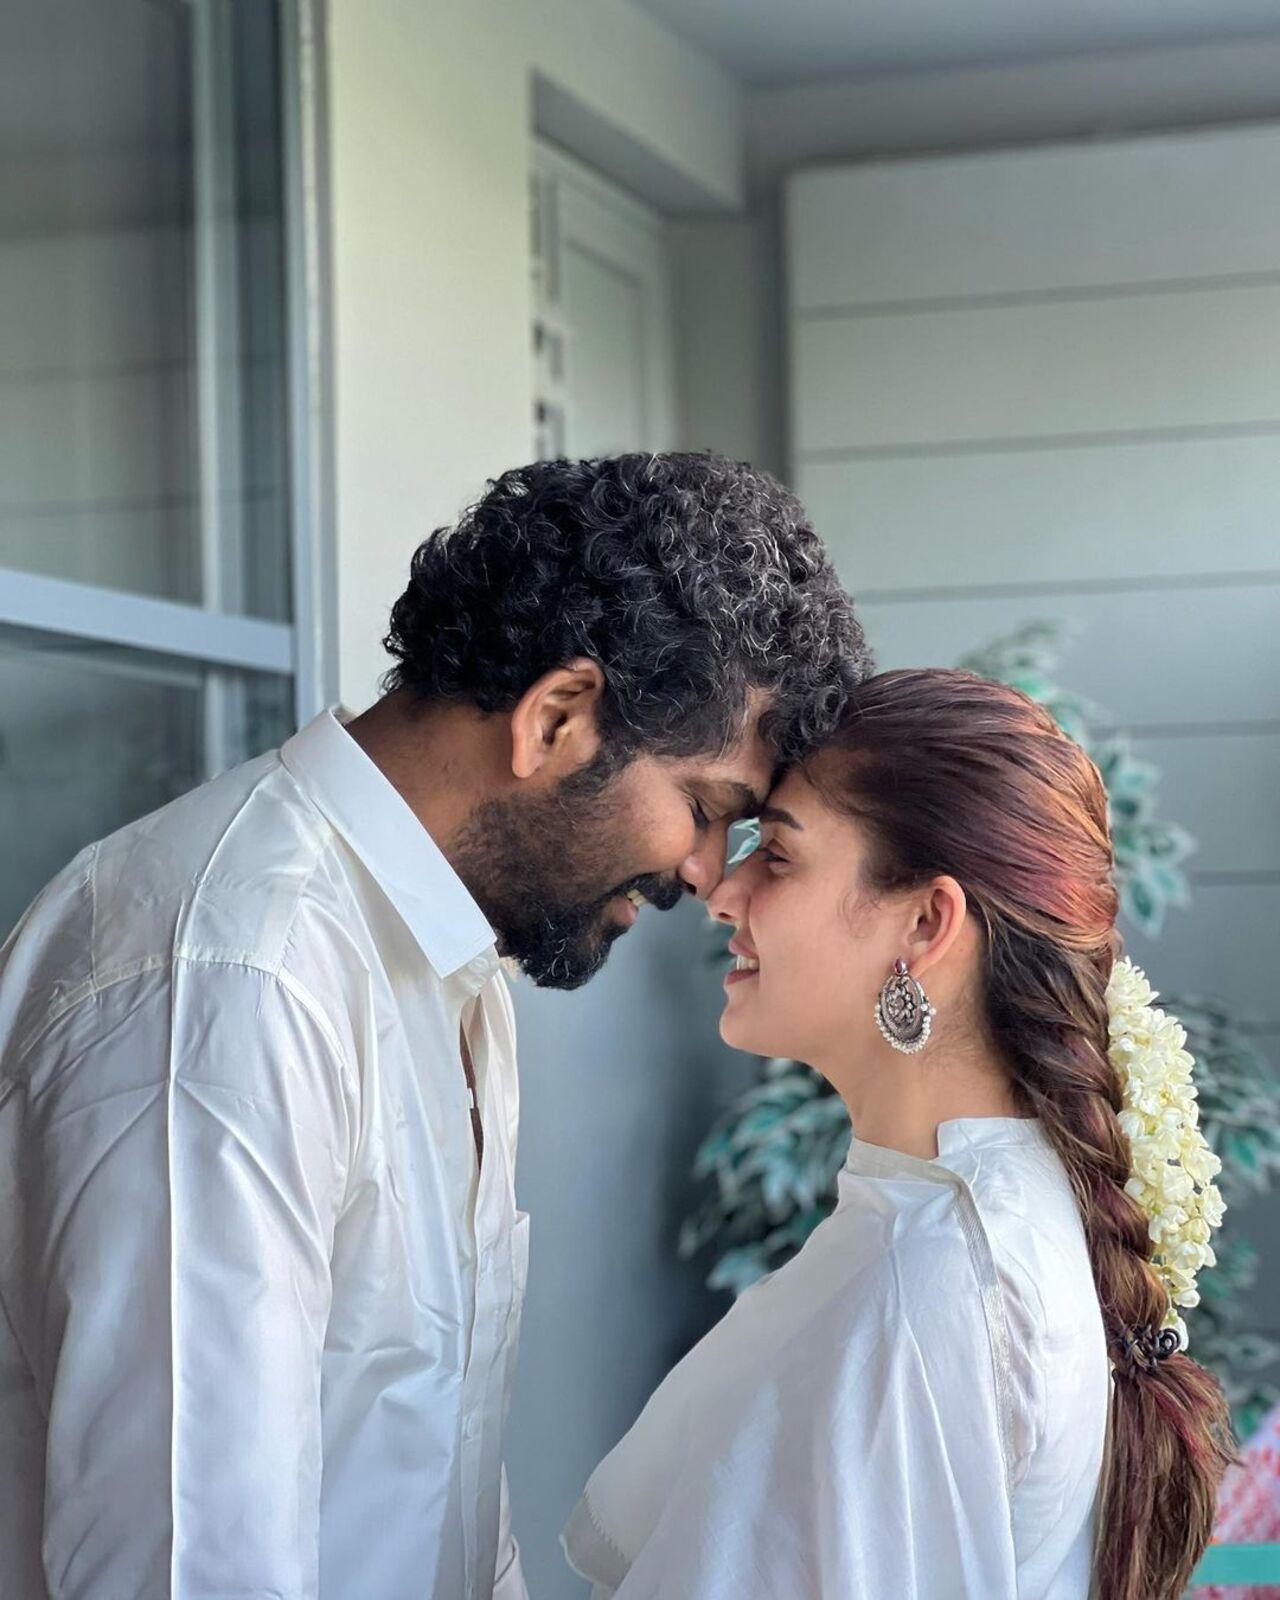 Nayanthara and Vignesh are among the most loved and adored celeb couples down South and set major goals by being each other's cheerleaders